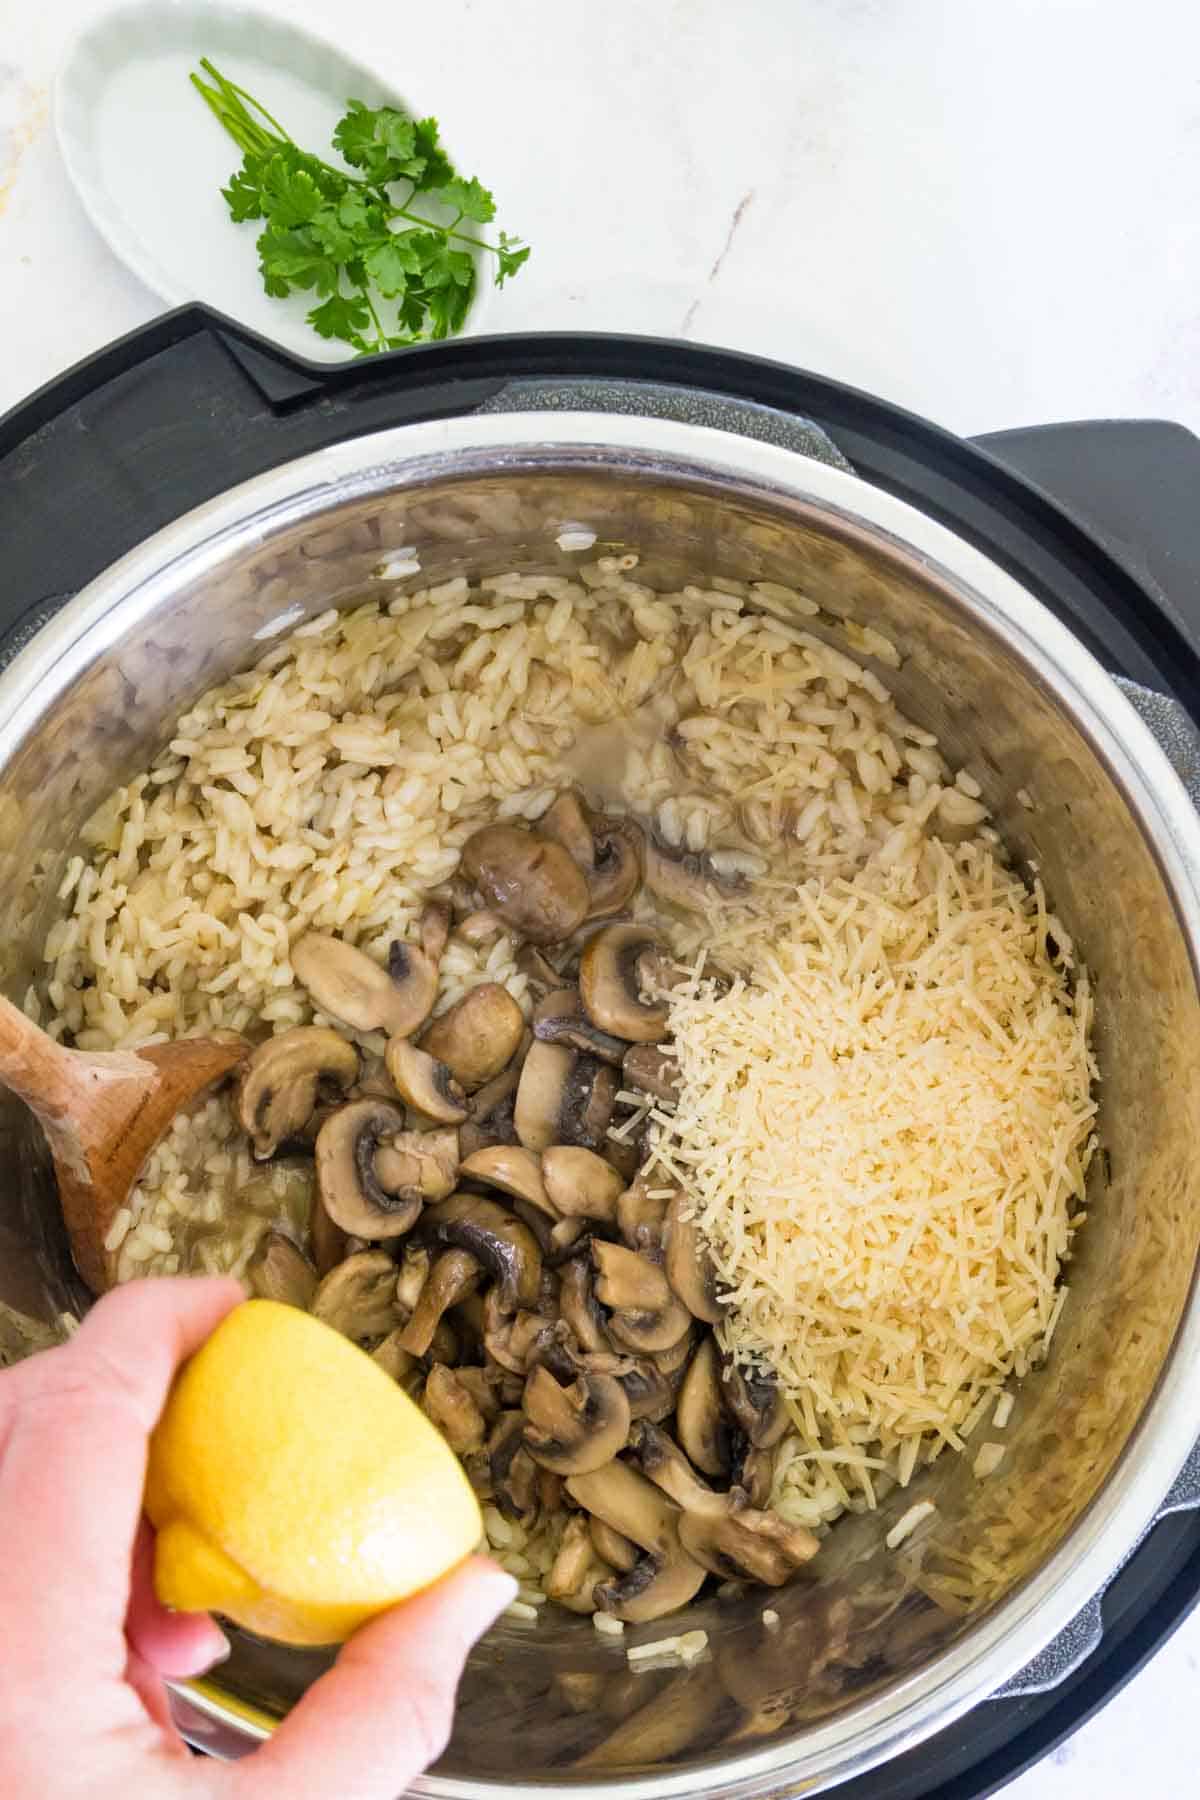 A hand squeezes a lemon over risotto with mushrooms and parmesan inside the instant pot.